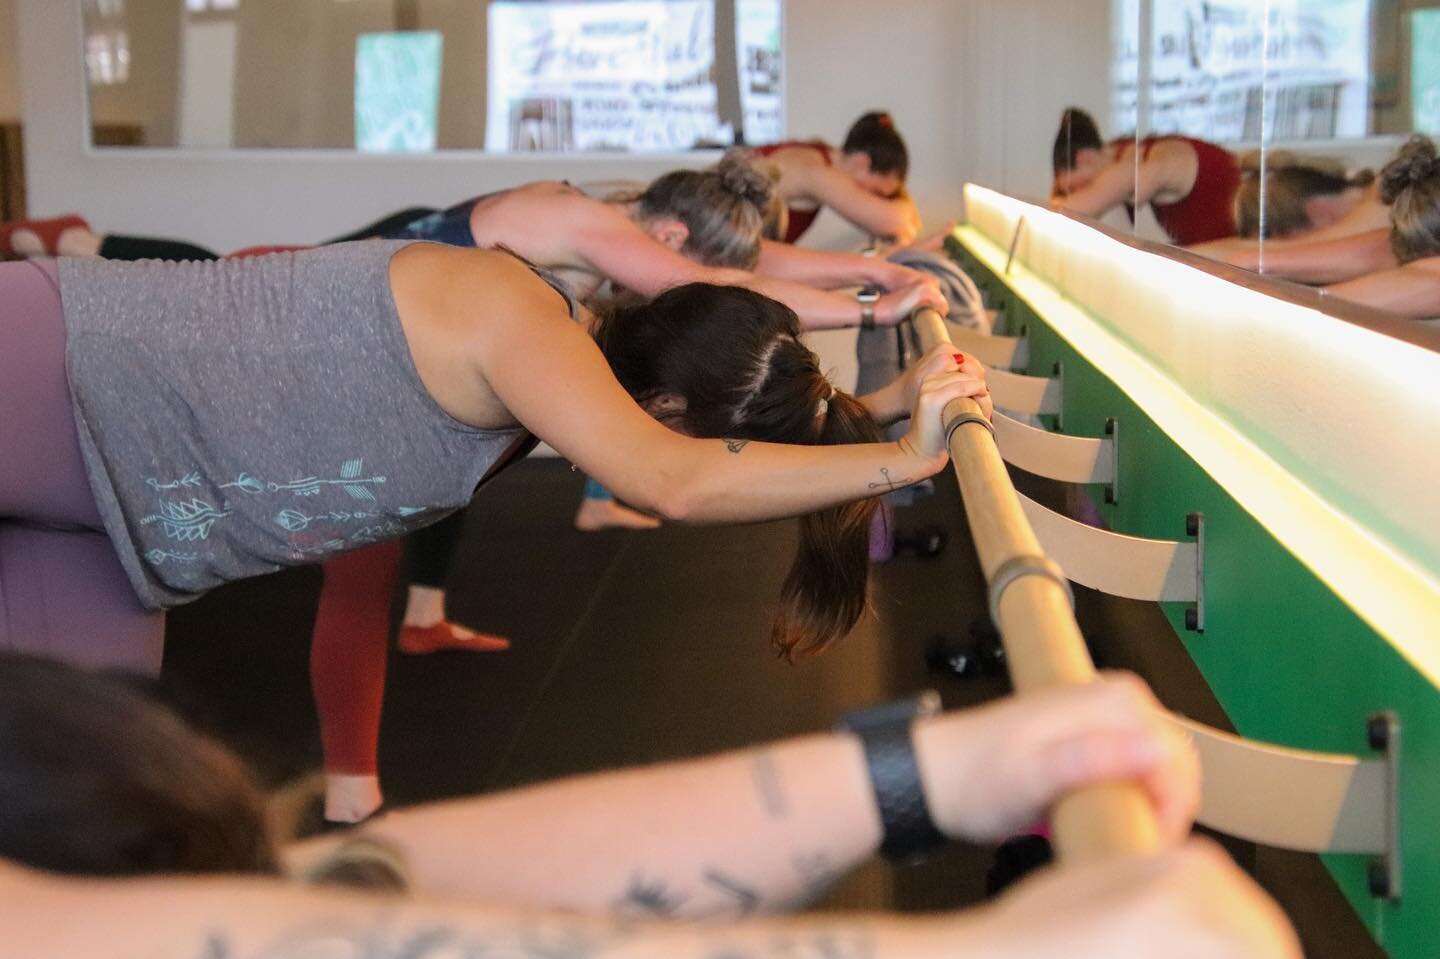 Join our fit fam members who are feeling confident, strong, and connected. 💚 
.
.
.
#daytongym #progressoverperfection #daytonoh #barre #trxtraining #axlestrengthtraining #bootybarre #success #planning #preparation #commitment